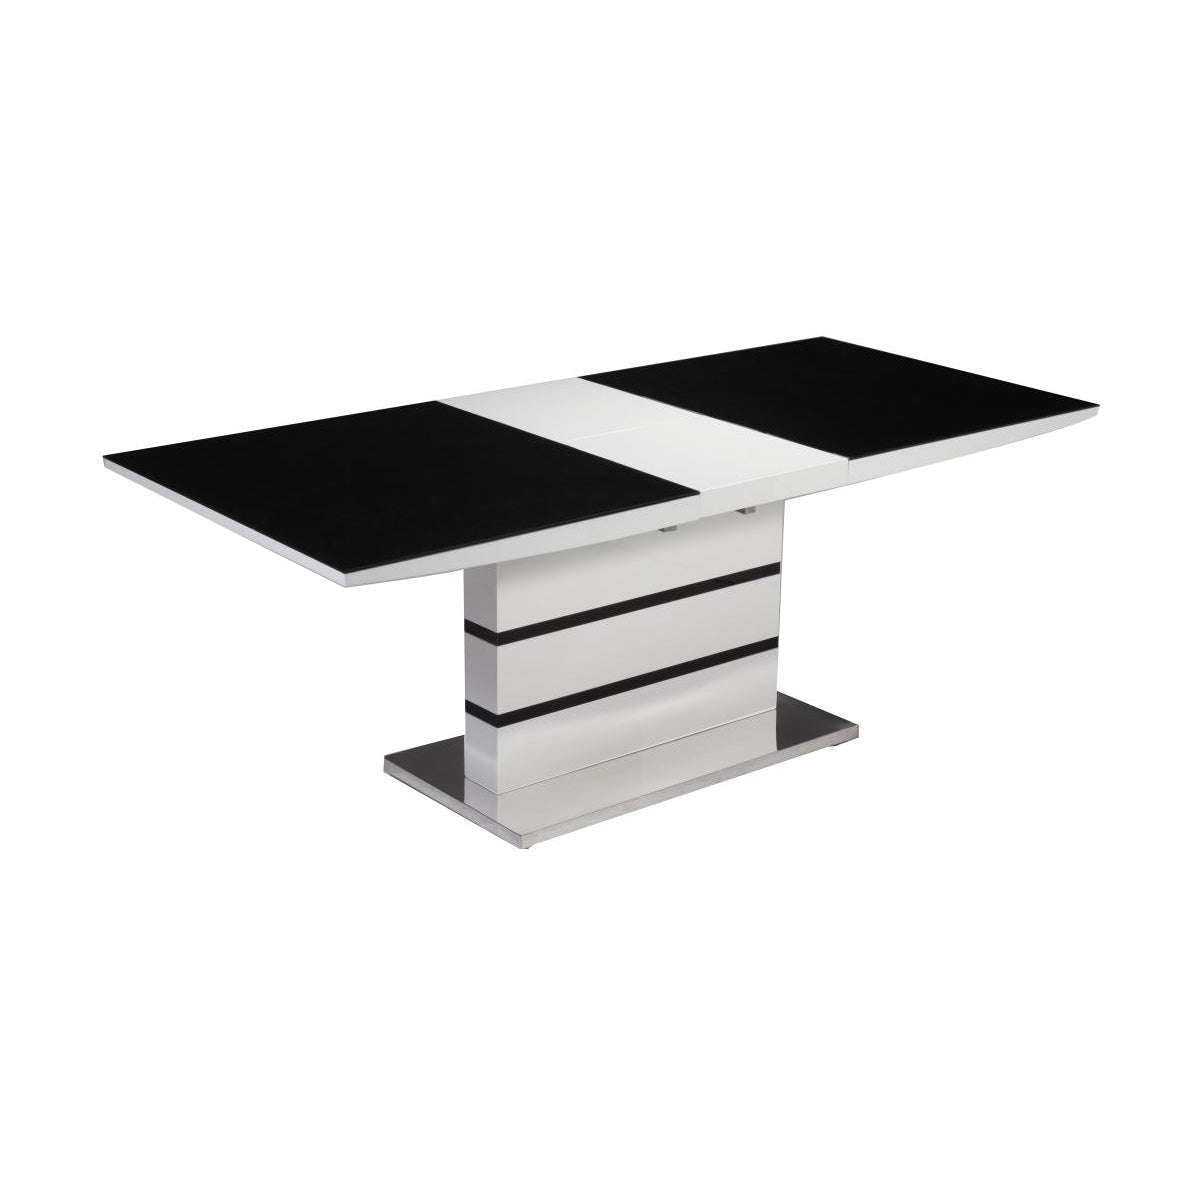 Ashpinoke:Aldridge High Gloss Dining Table White with Black Glass Top,Dining Tables,Heartlands Furniture